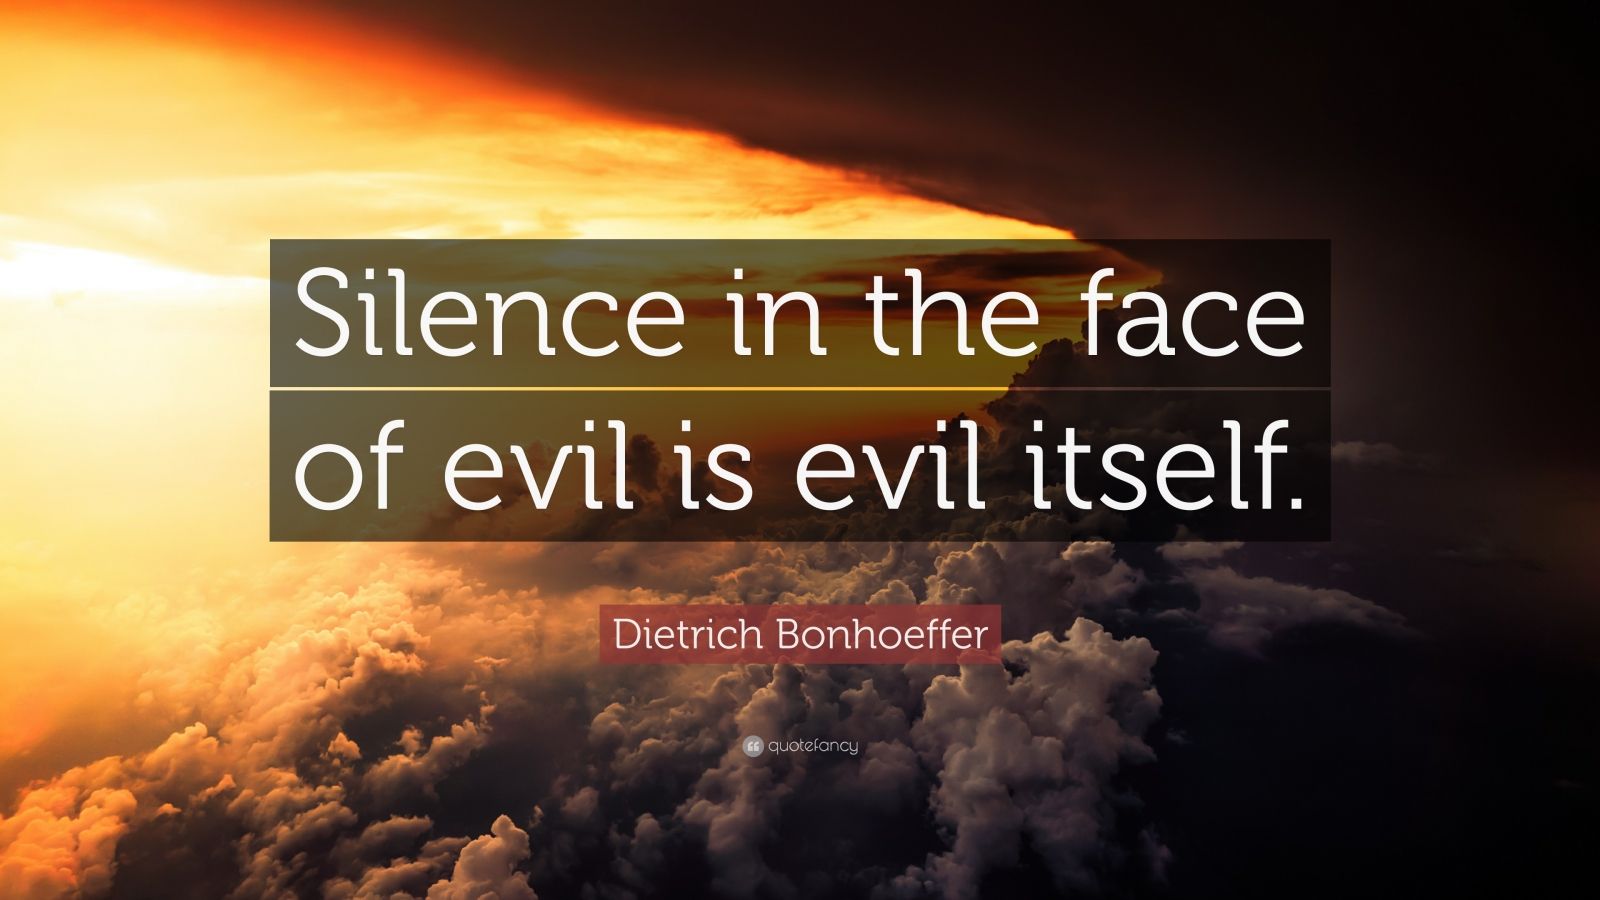 Dietrich Bonhoeffer Quote: “Silence in the face of evil is evil itself